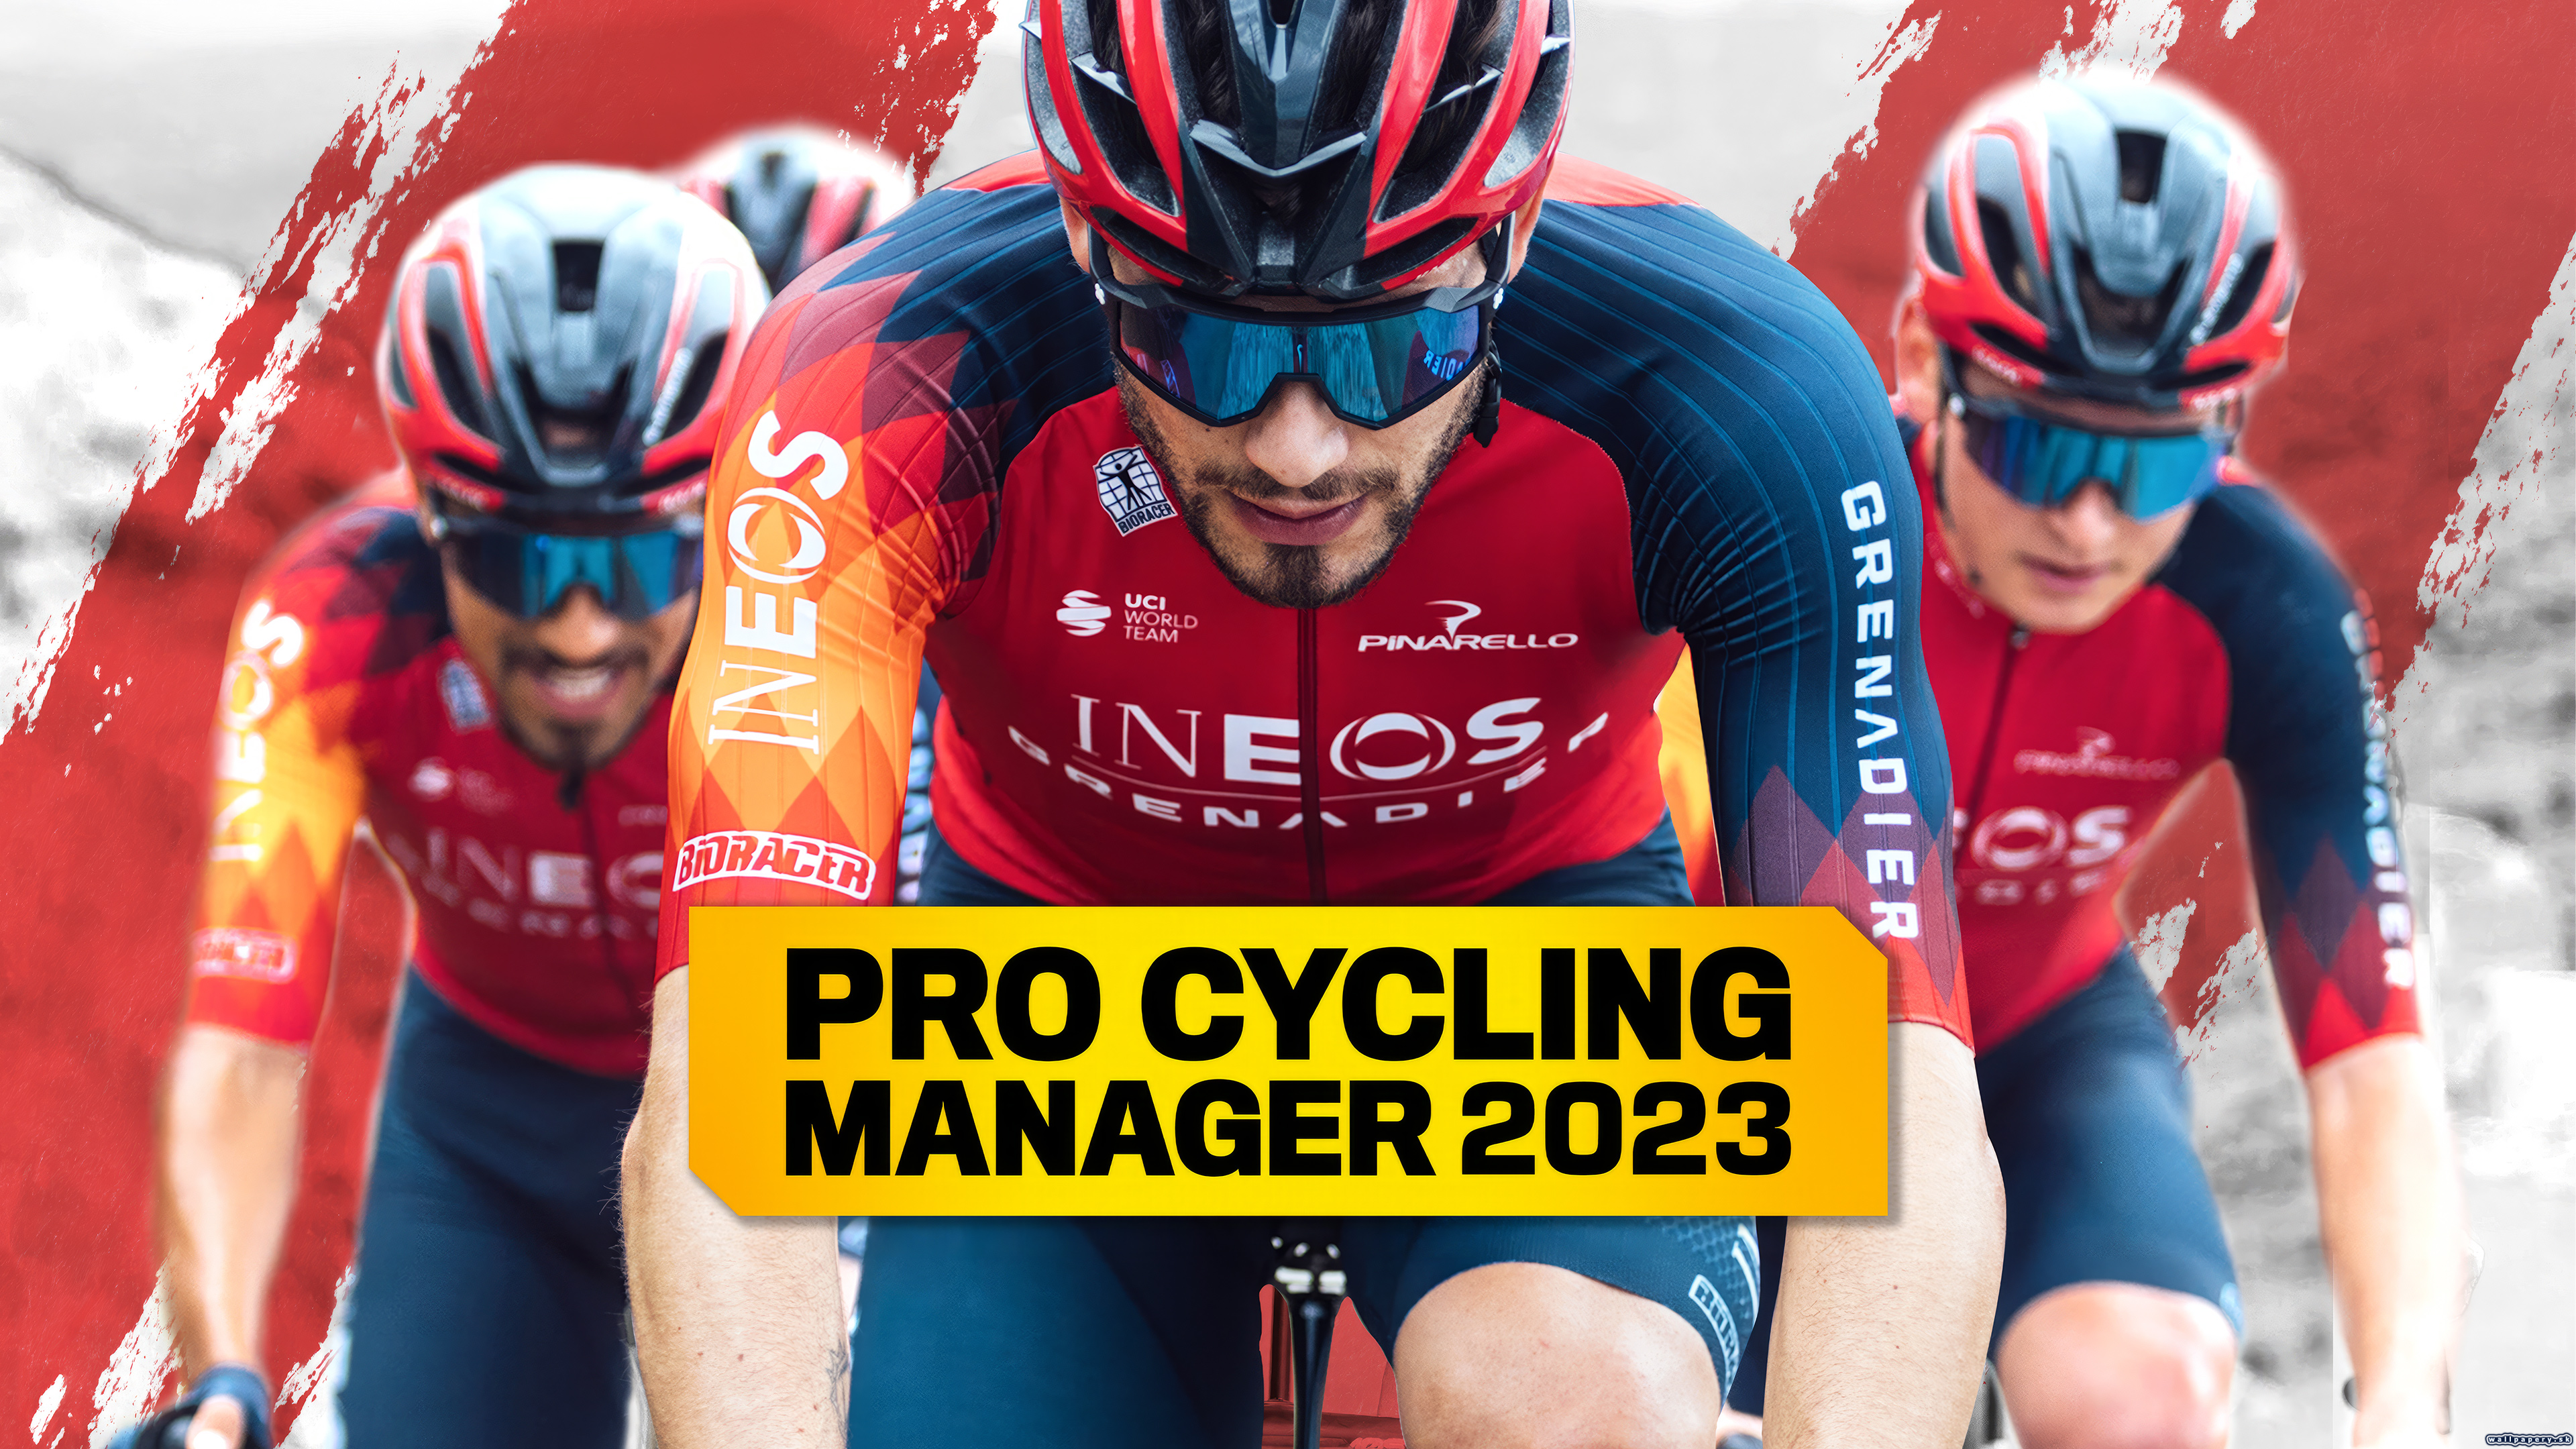 Pro Cycling Manager 2023 - wallpaper 1